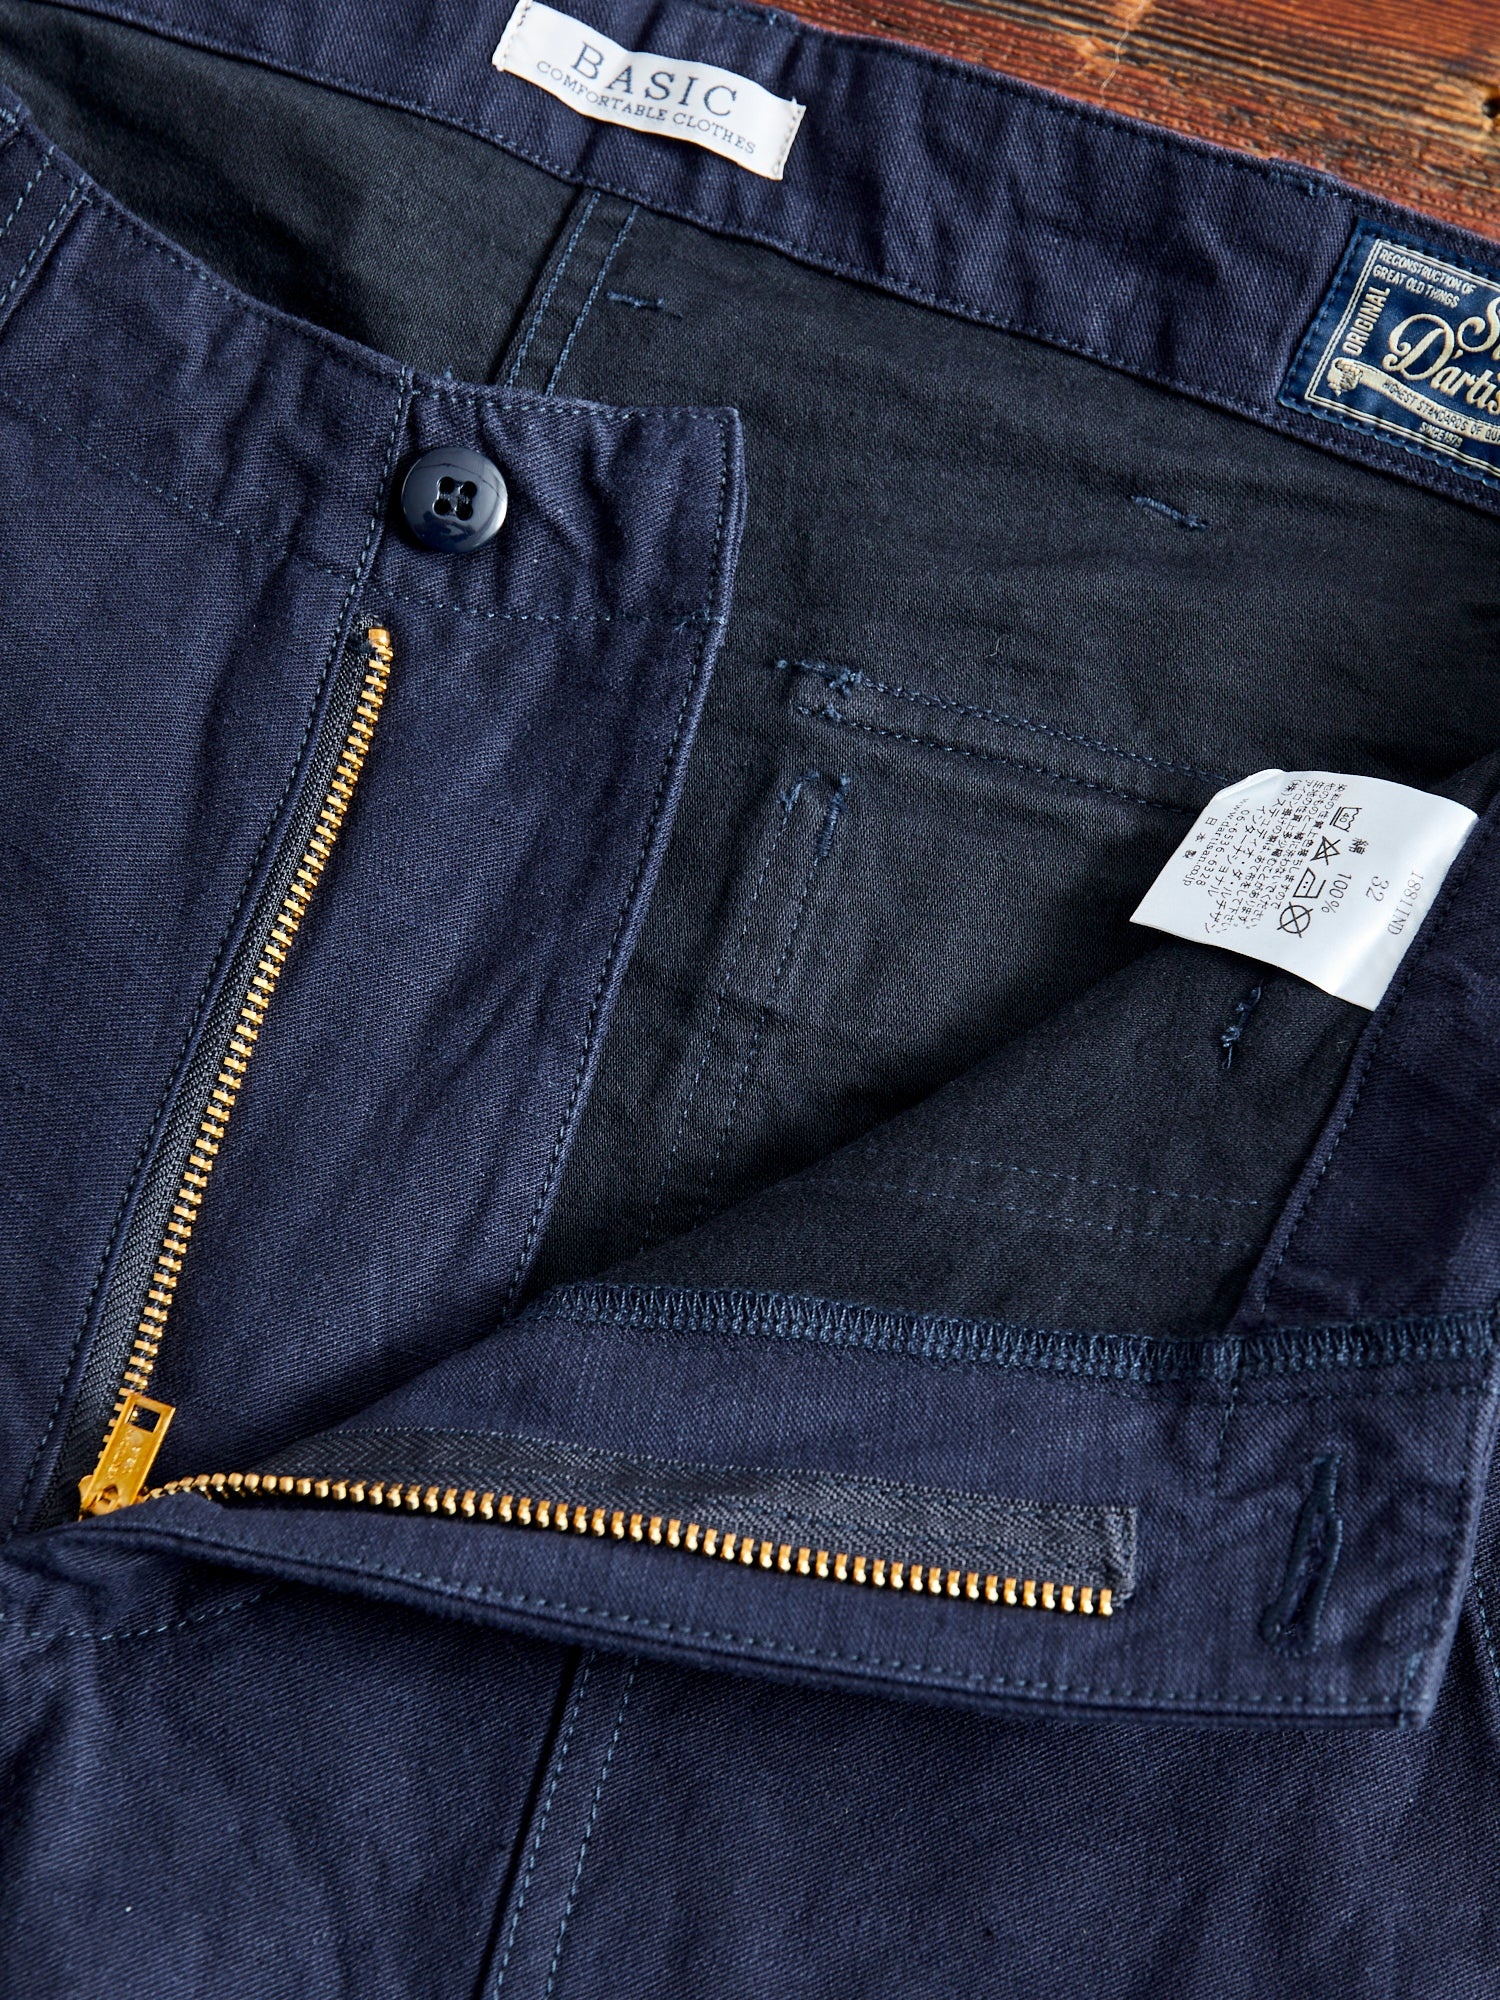 1811-IND Military Baker Pants in Indigo - 6